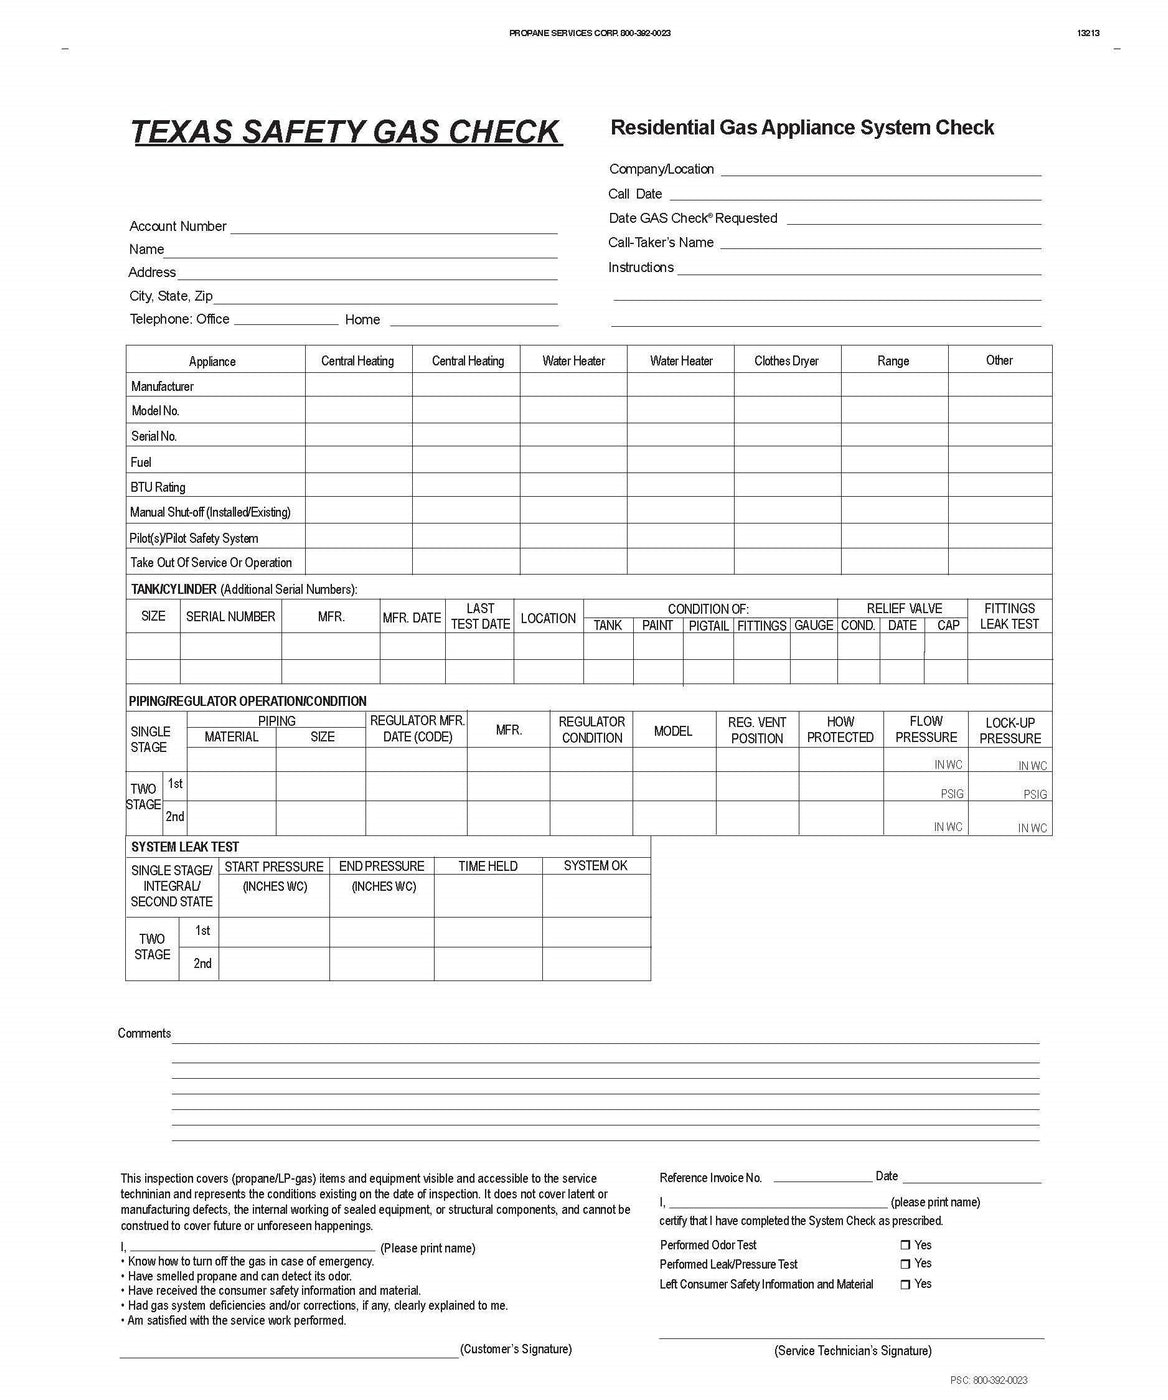 texas-safety-gas-check-forms-psc